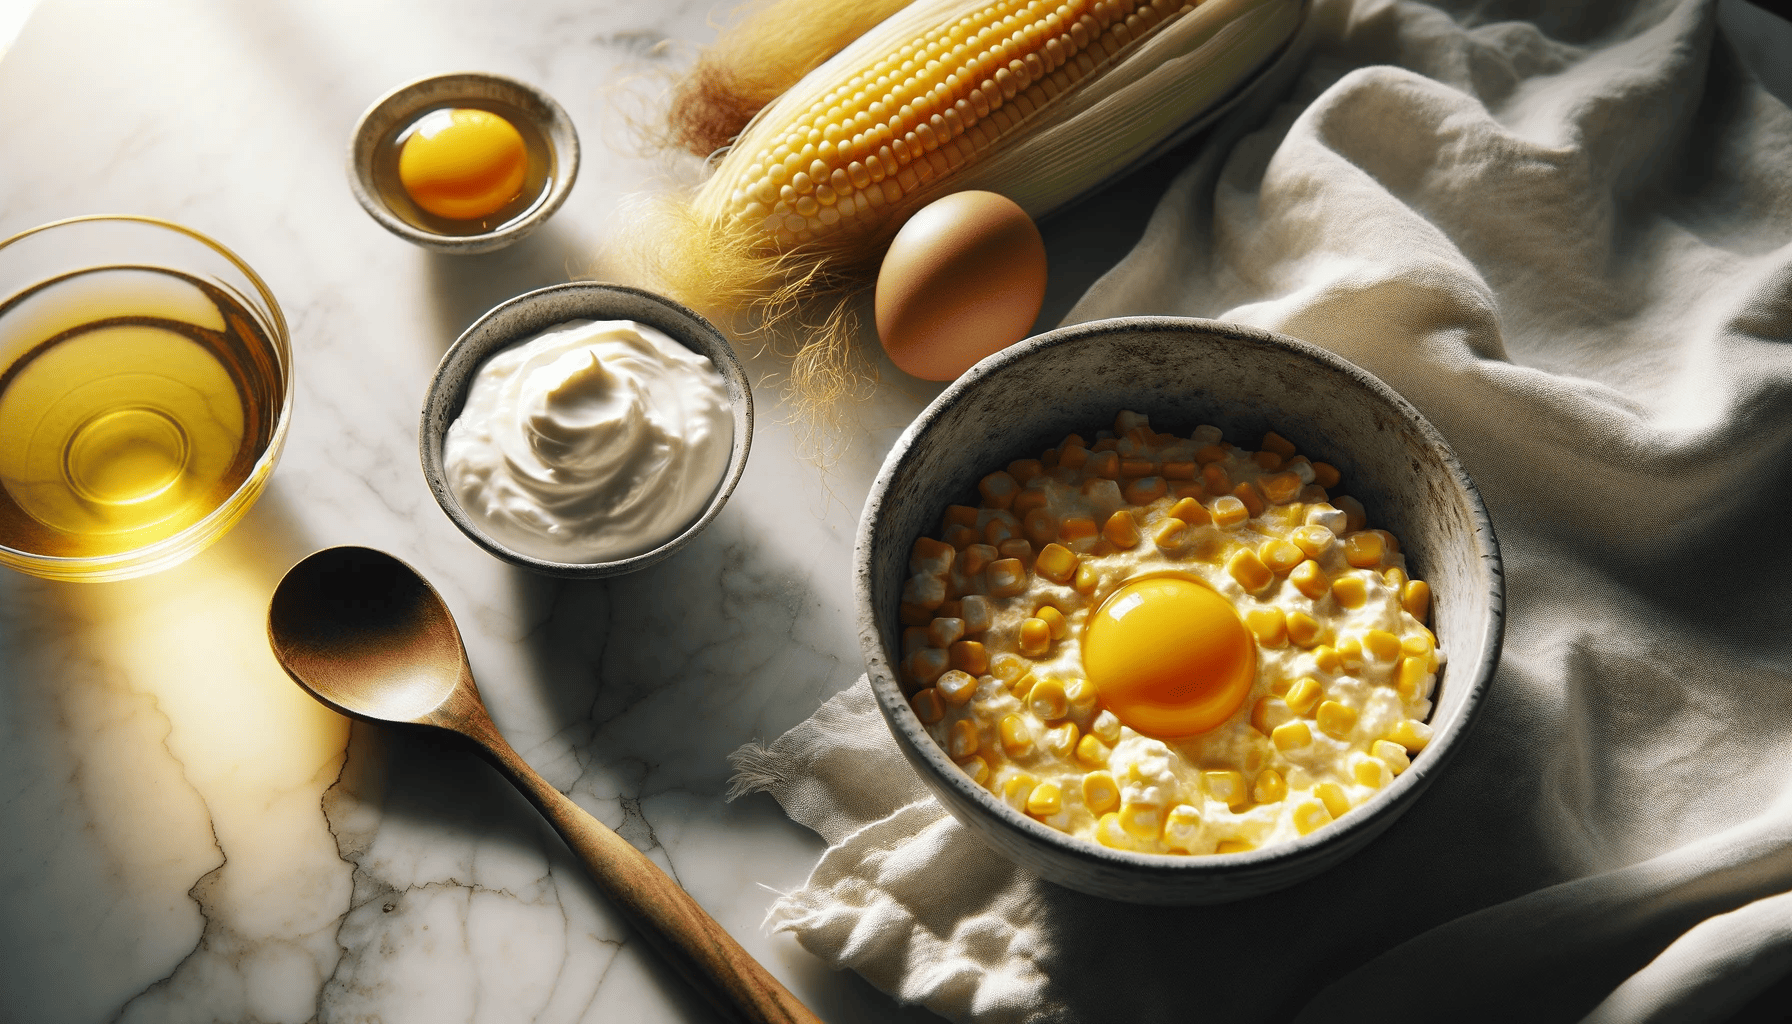 A bowl of golden corn mixture with a spoonful of sour cream on a white marble surface. Two egg yolks sit next to the bowl, suggesting the next step in the recipe preparation, under the gentle glow of natural light.